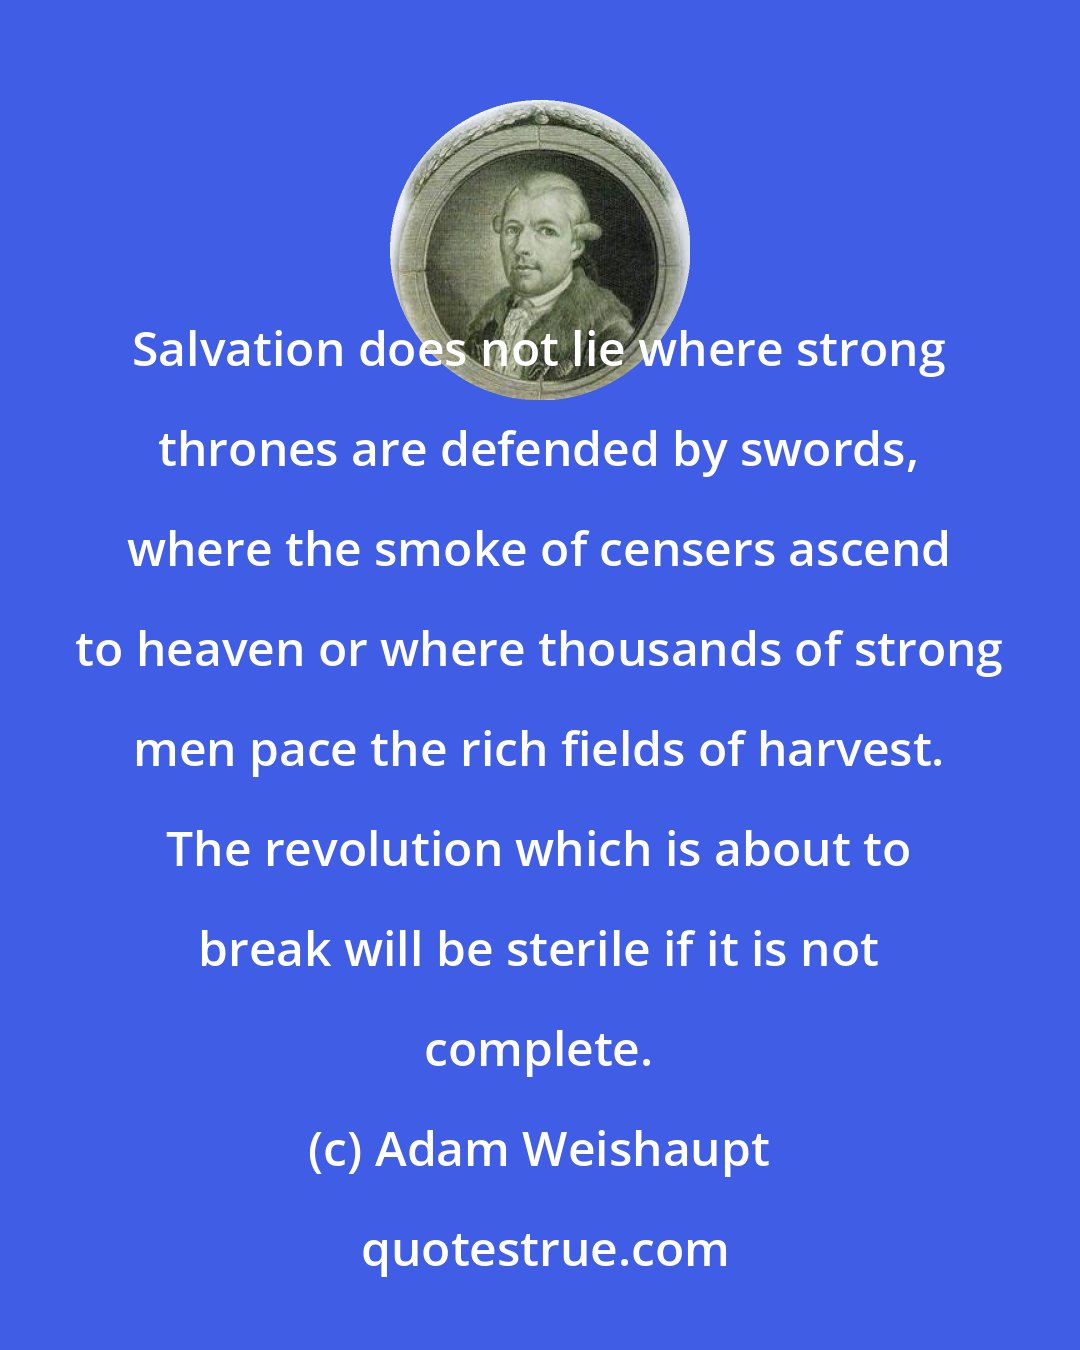 Adam Weishaupt: Salvation does not lie where strong thrones are defended by swords, where the smoke of censers ascend to heaven or where thousands of strong men pace the rich fields of harvest. The revolution which is about to break will be sterile if it is not complete.